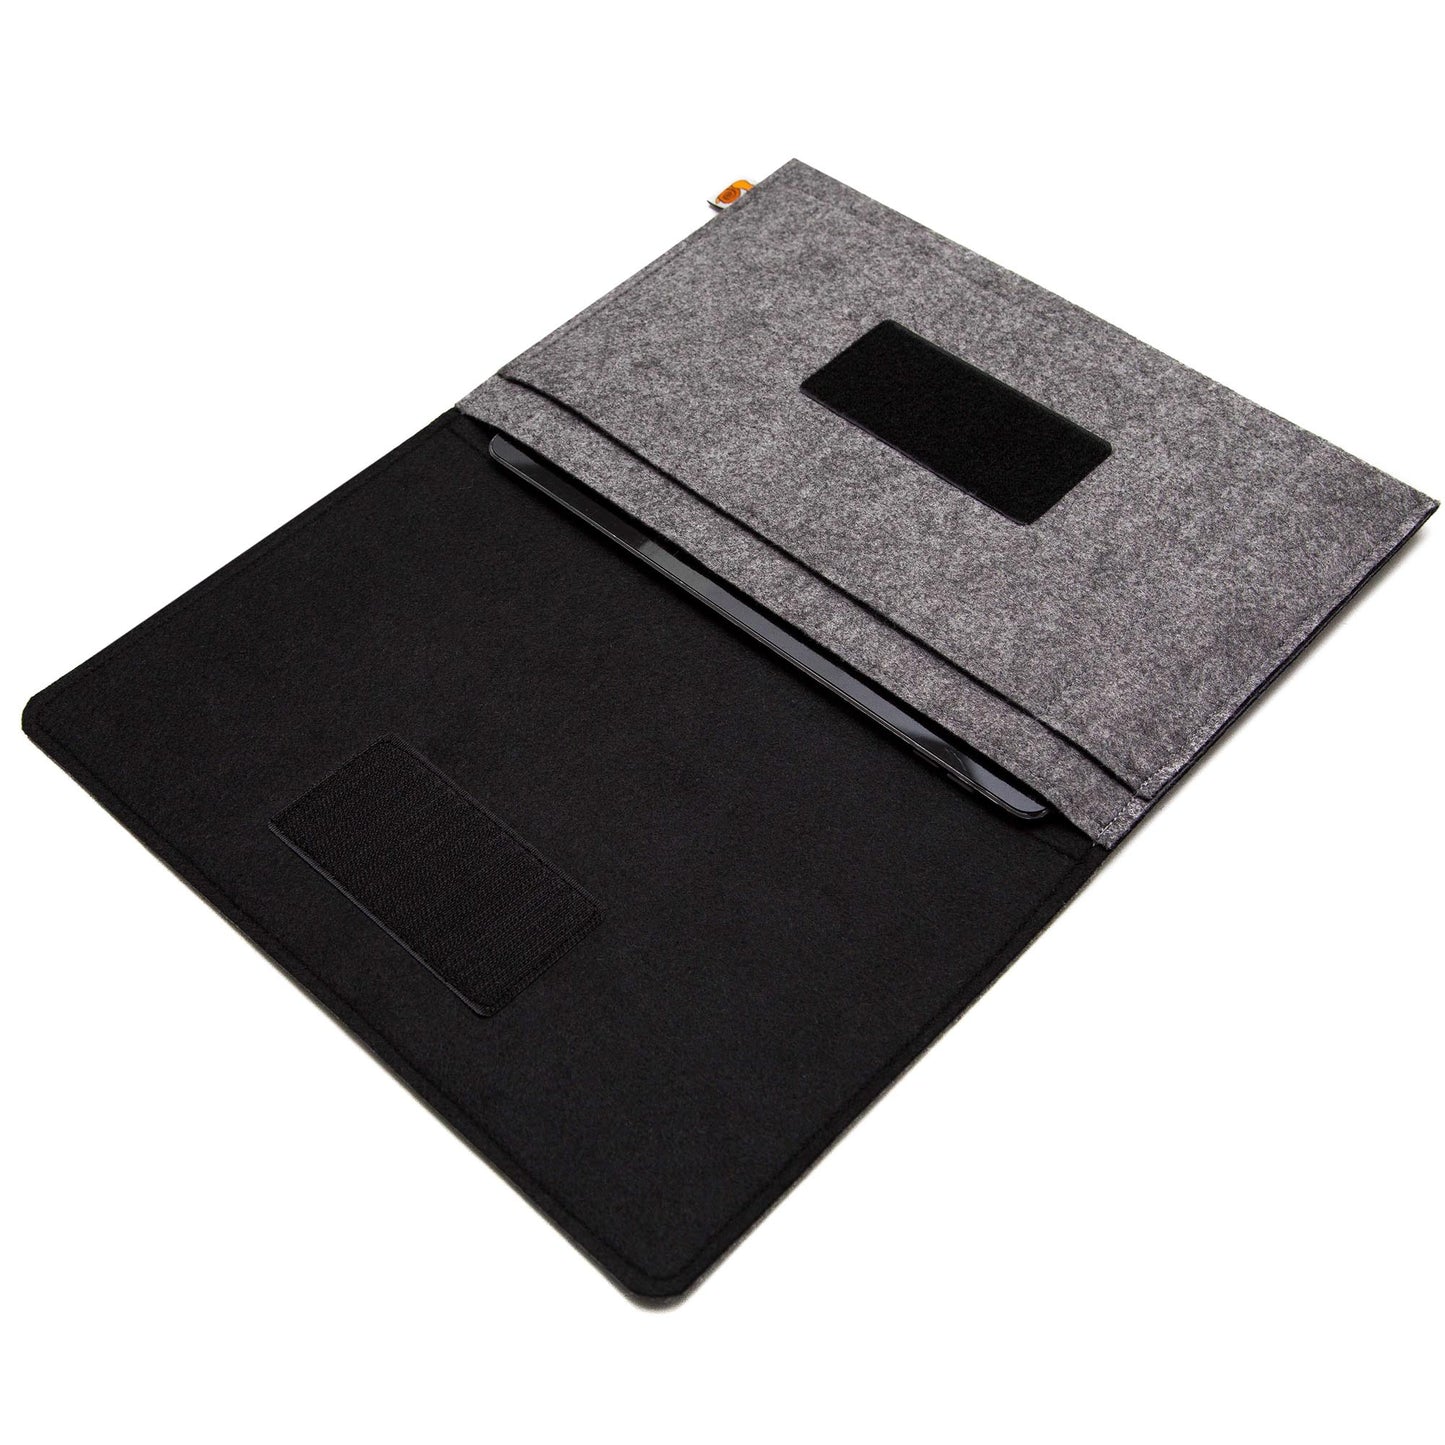 Premium Felt iPad Cover: Ultimate Protection with Accessories Pocket - Grey & Black